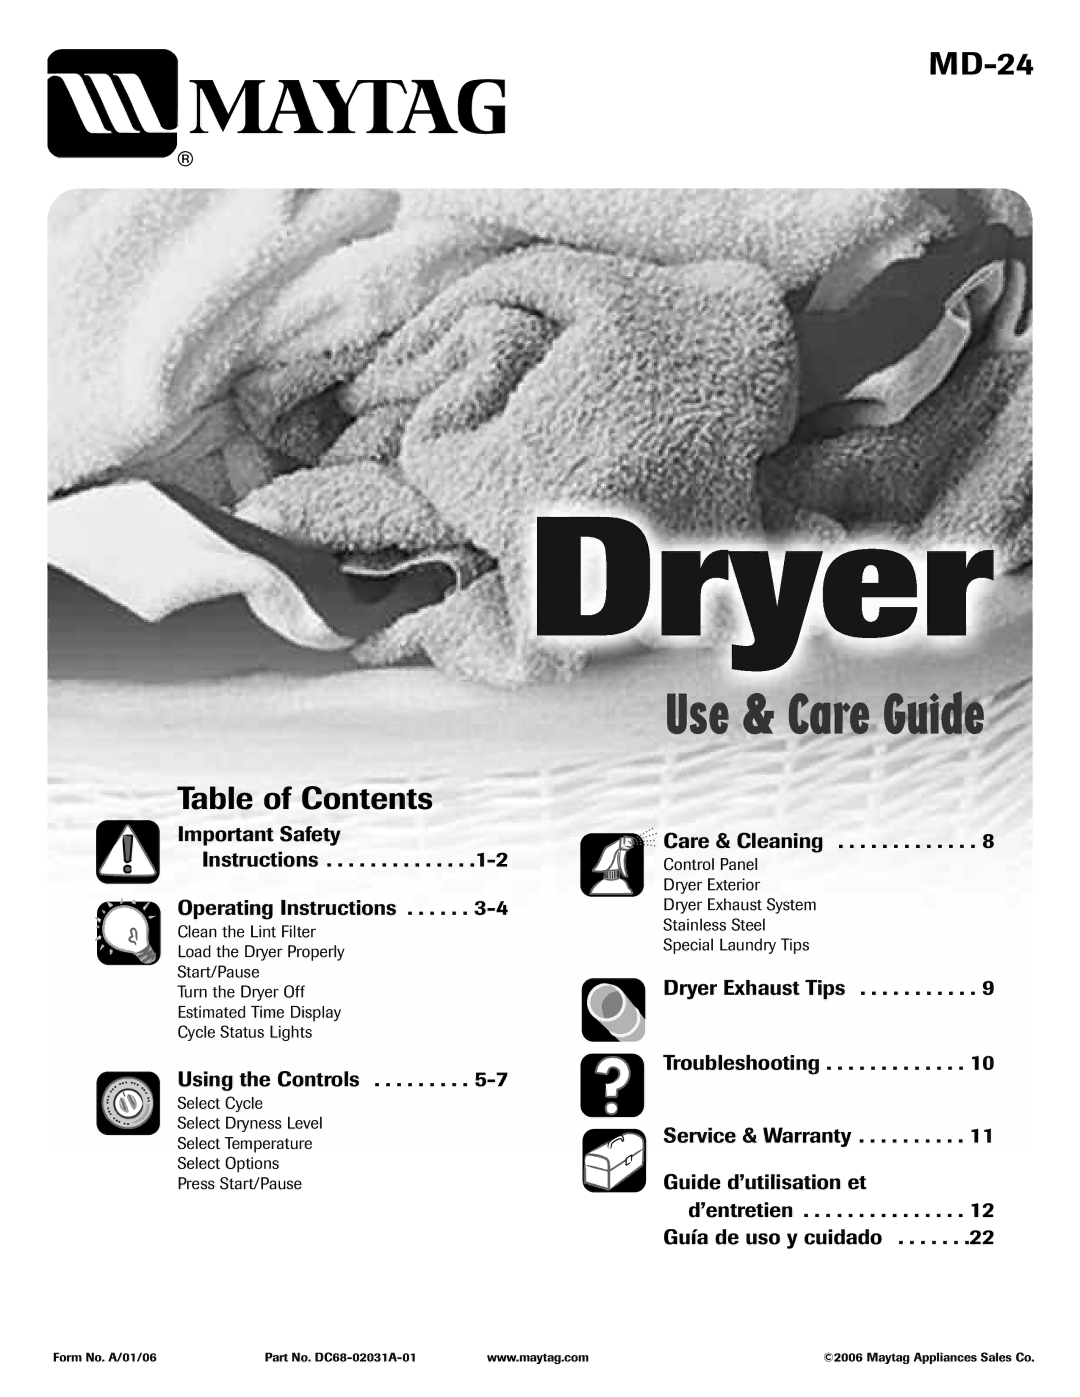 Maytag MD-24 important safety instructions Table of Contents 